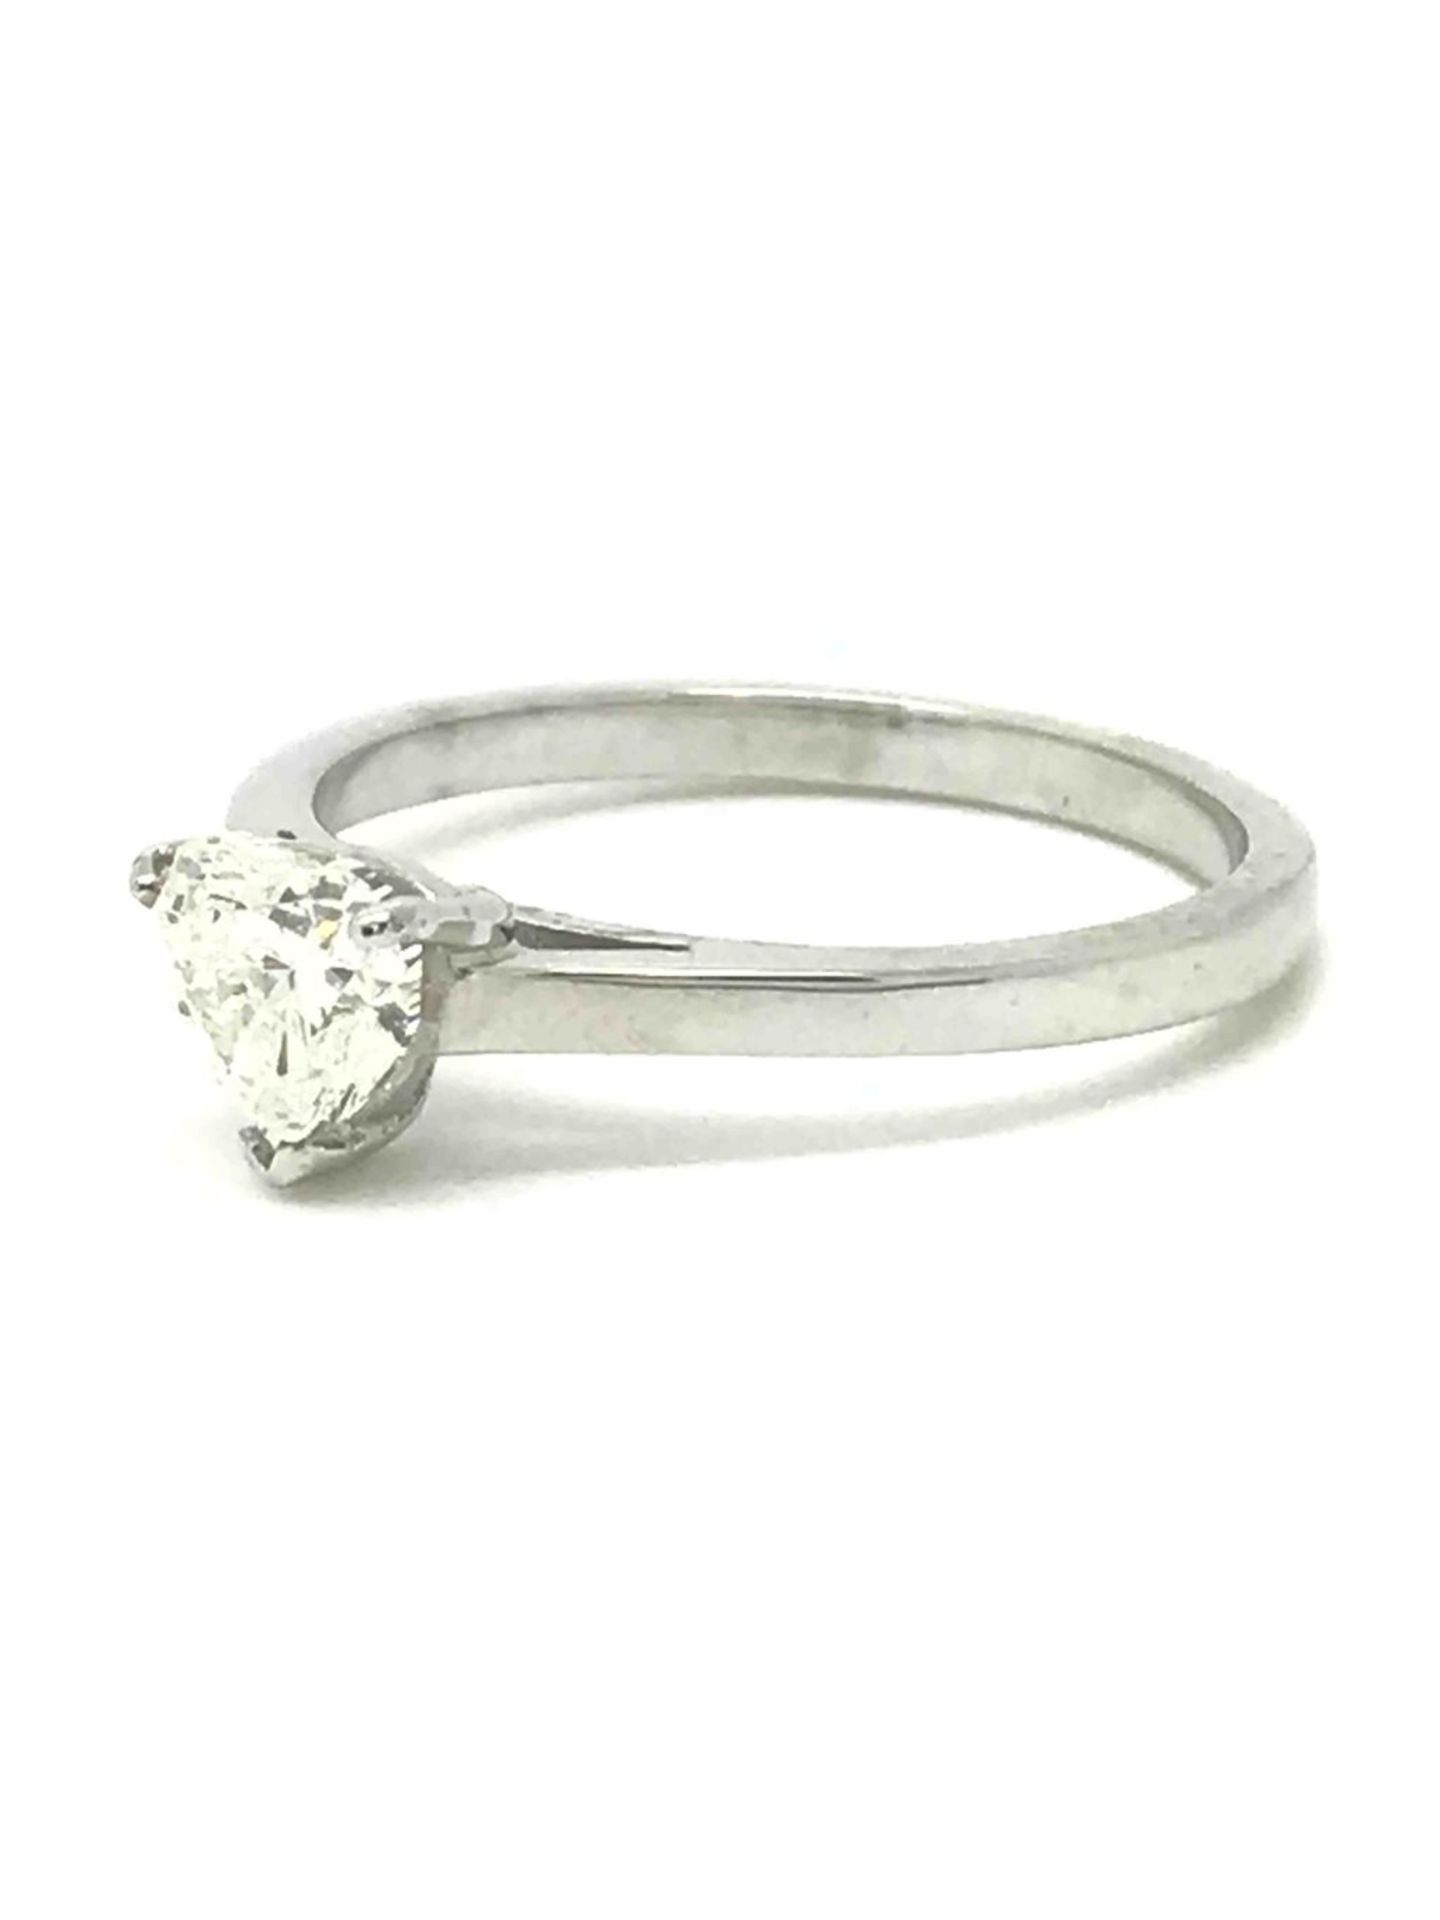 Certificated 0.72ct Heart Shaped Diamond Single Stone Ring - Image 2 of 5